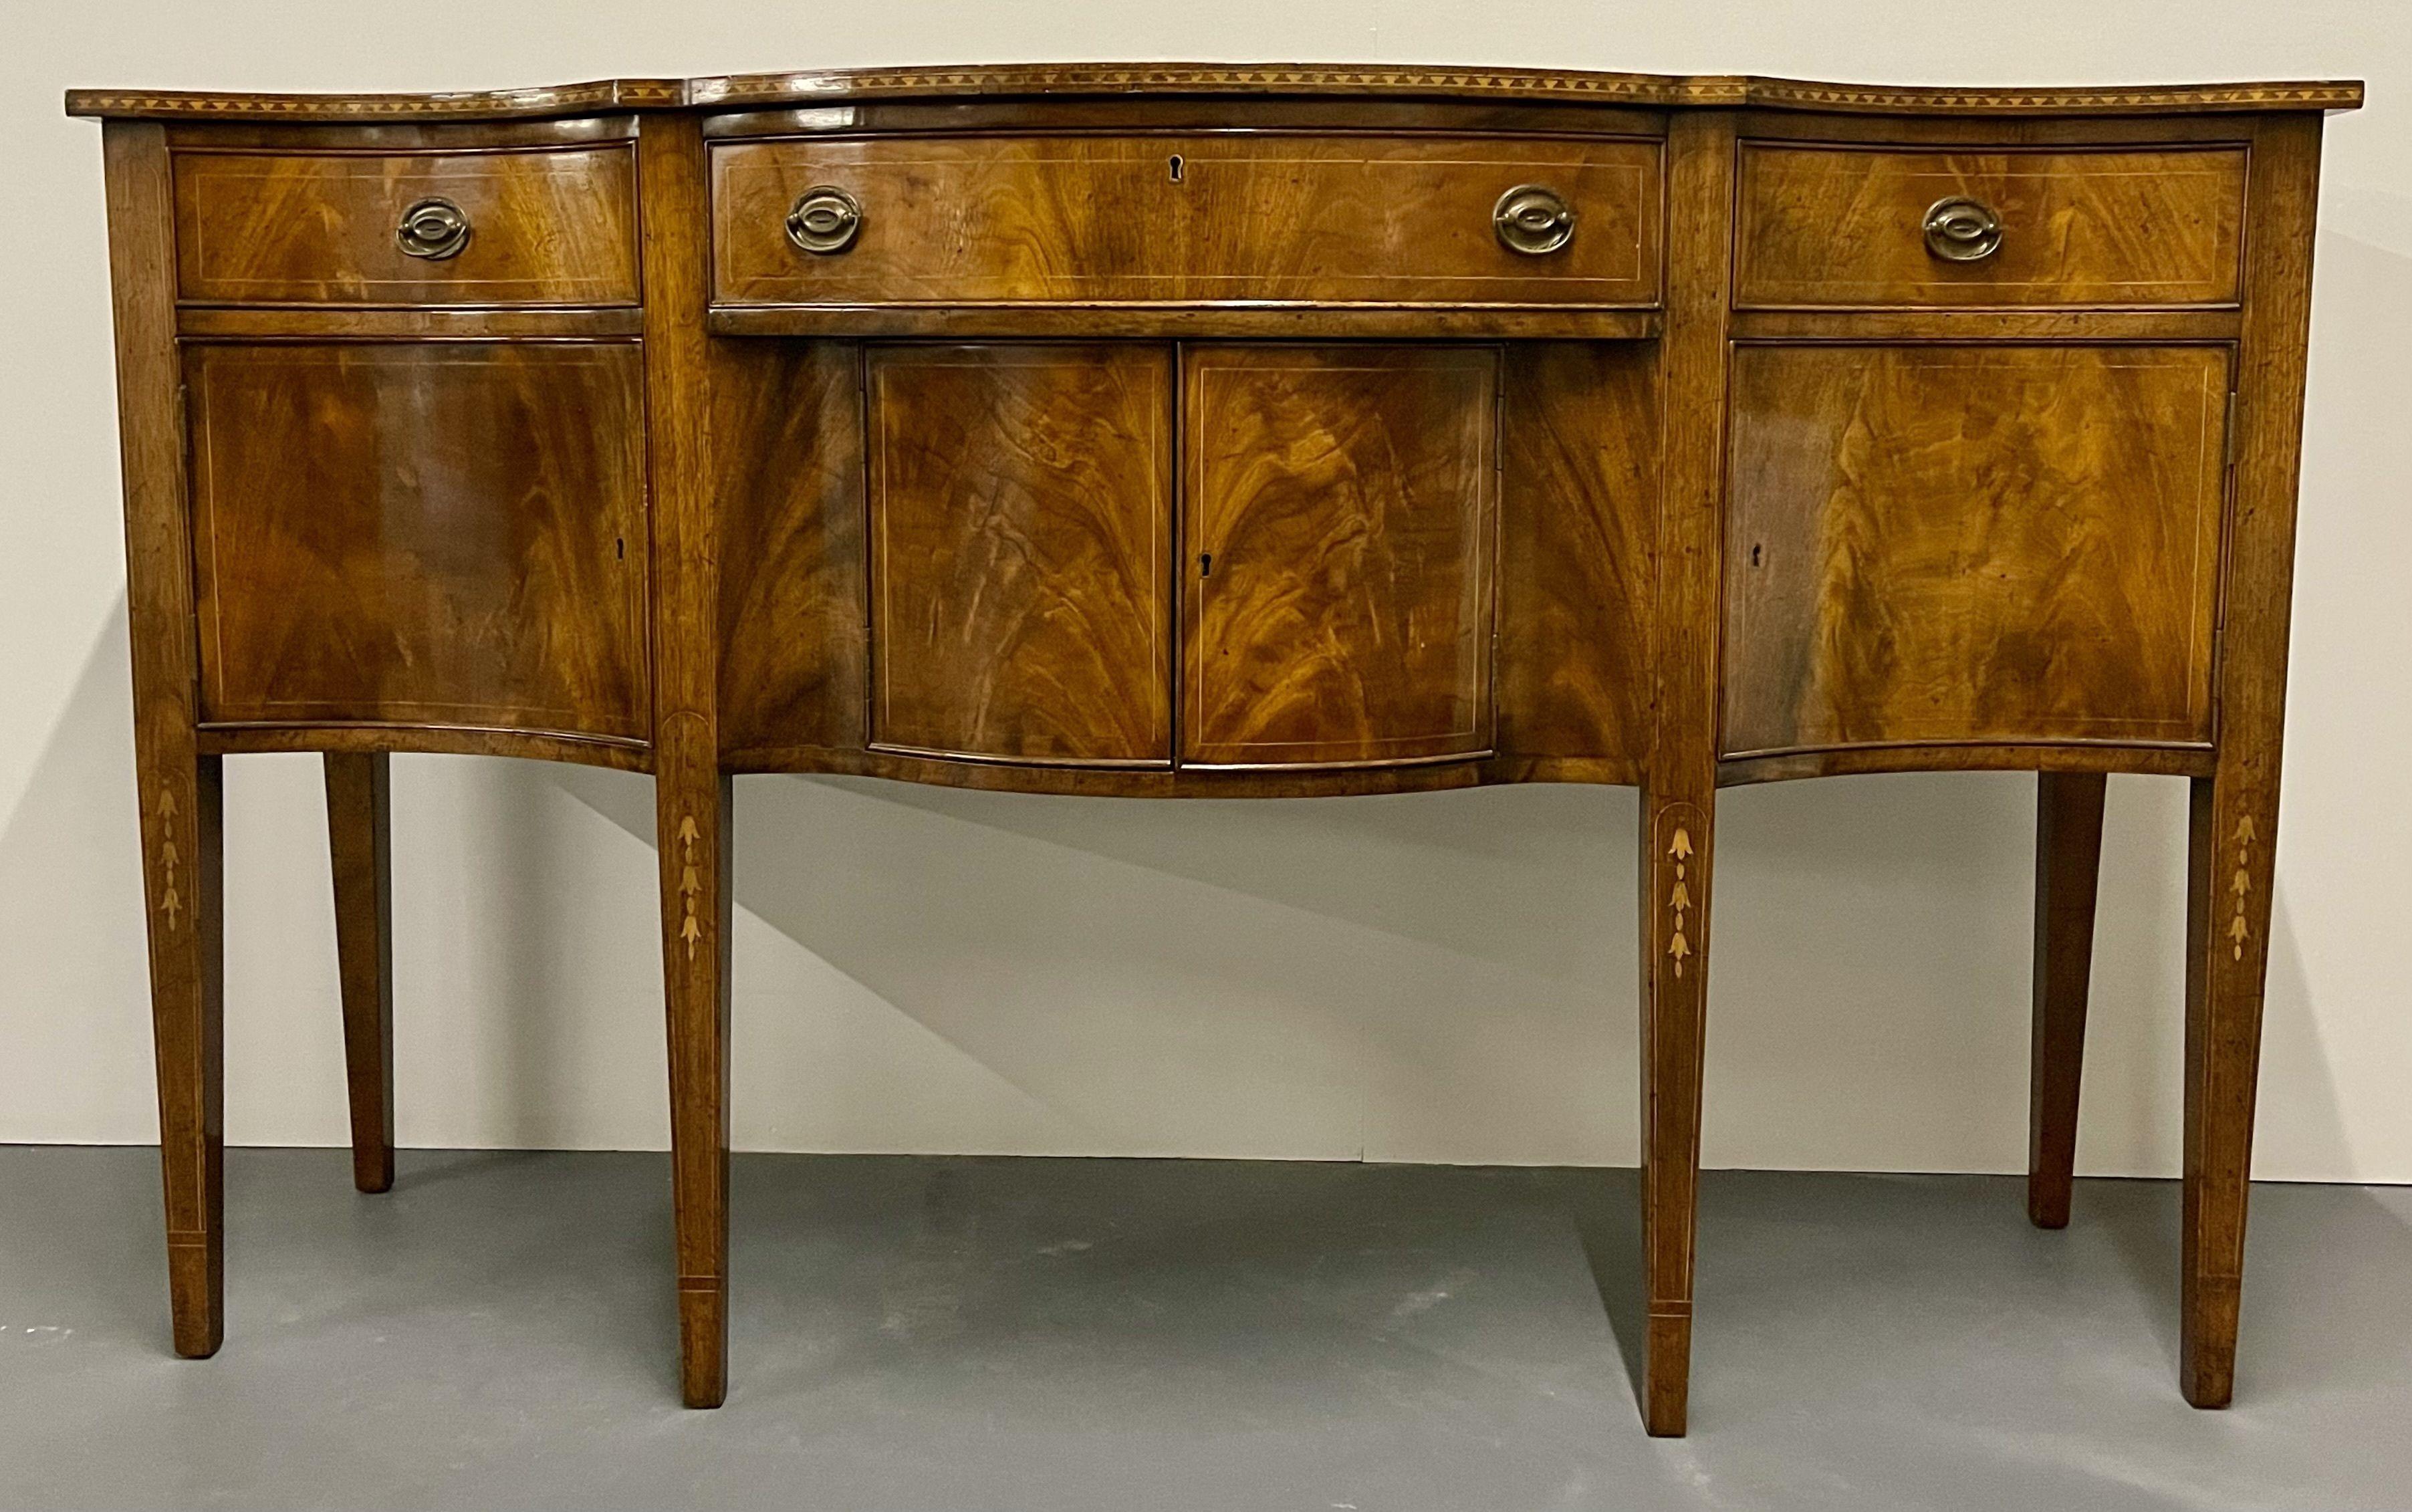 A Federal Sideboard late 19th Early 20th Century. This finely detailed inlaid sold mahogany sideboard has a magnificent flame mahogany finish with all over inlays of bellflower and line design of serpentine shape.

H 39